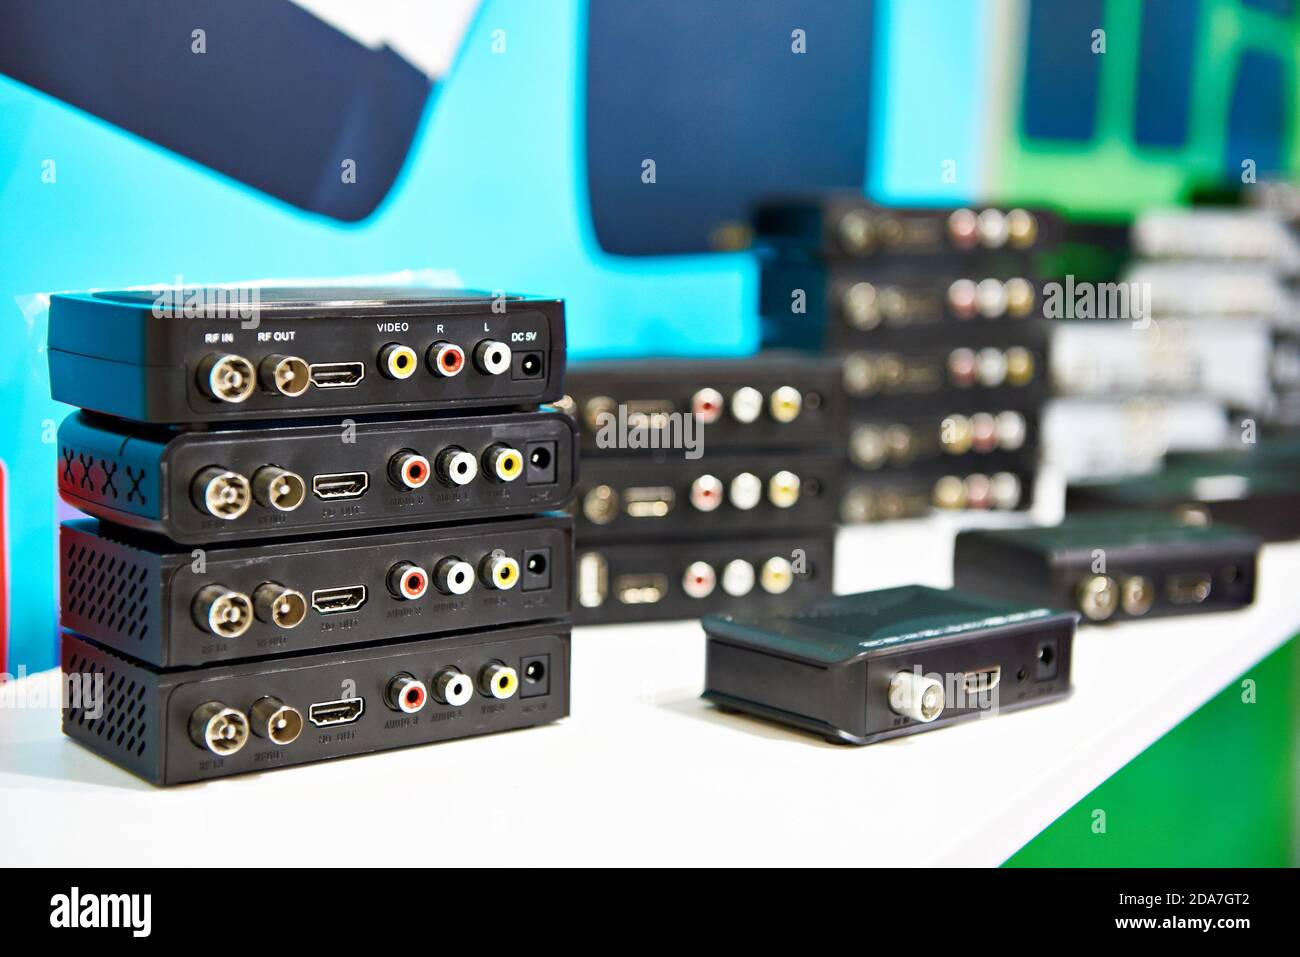 Digital receivers for cable TV in store Stock Photo